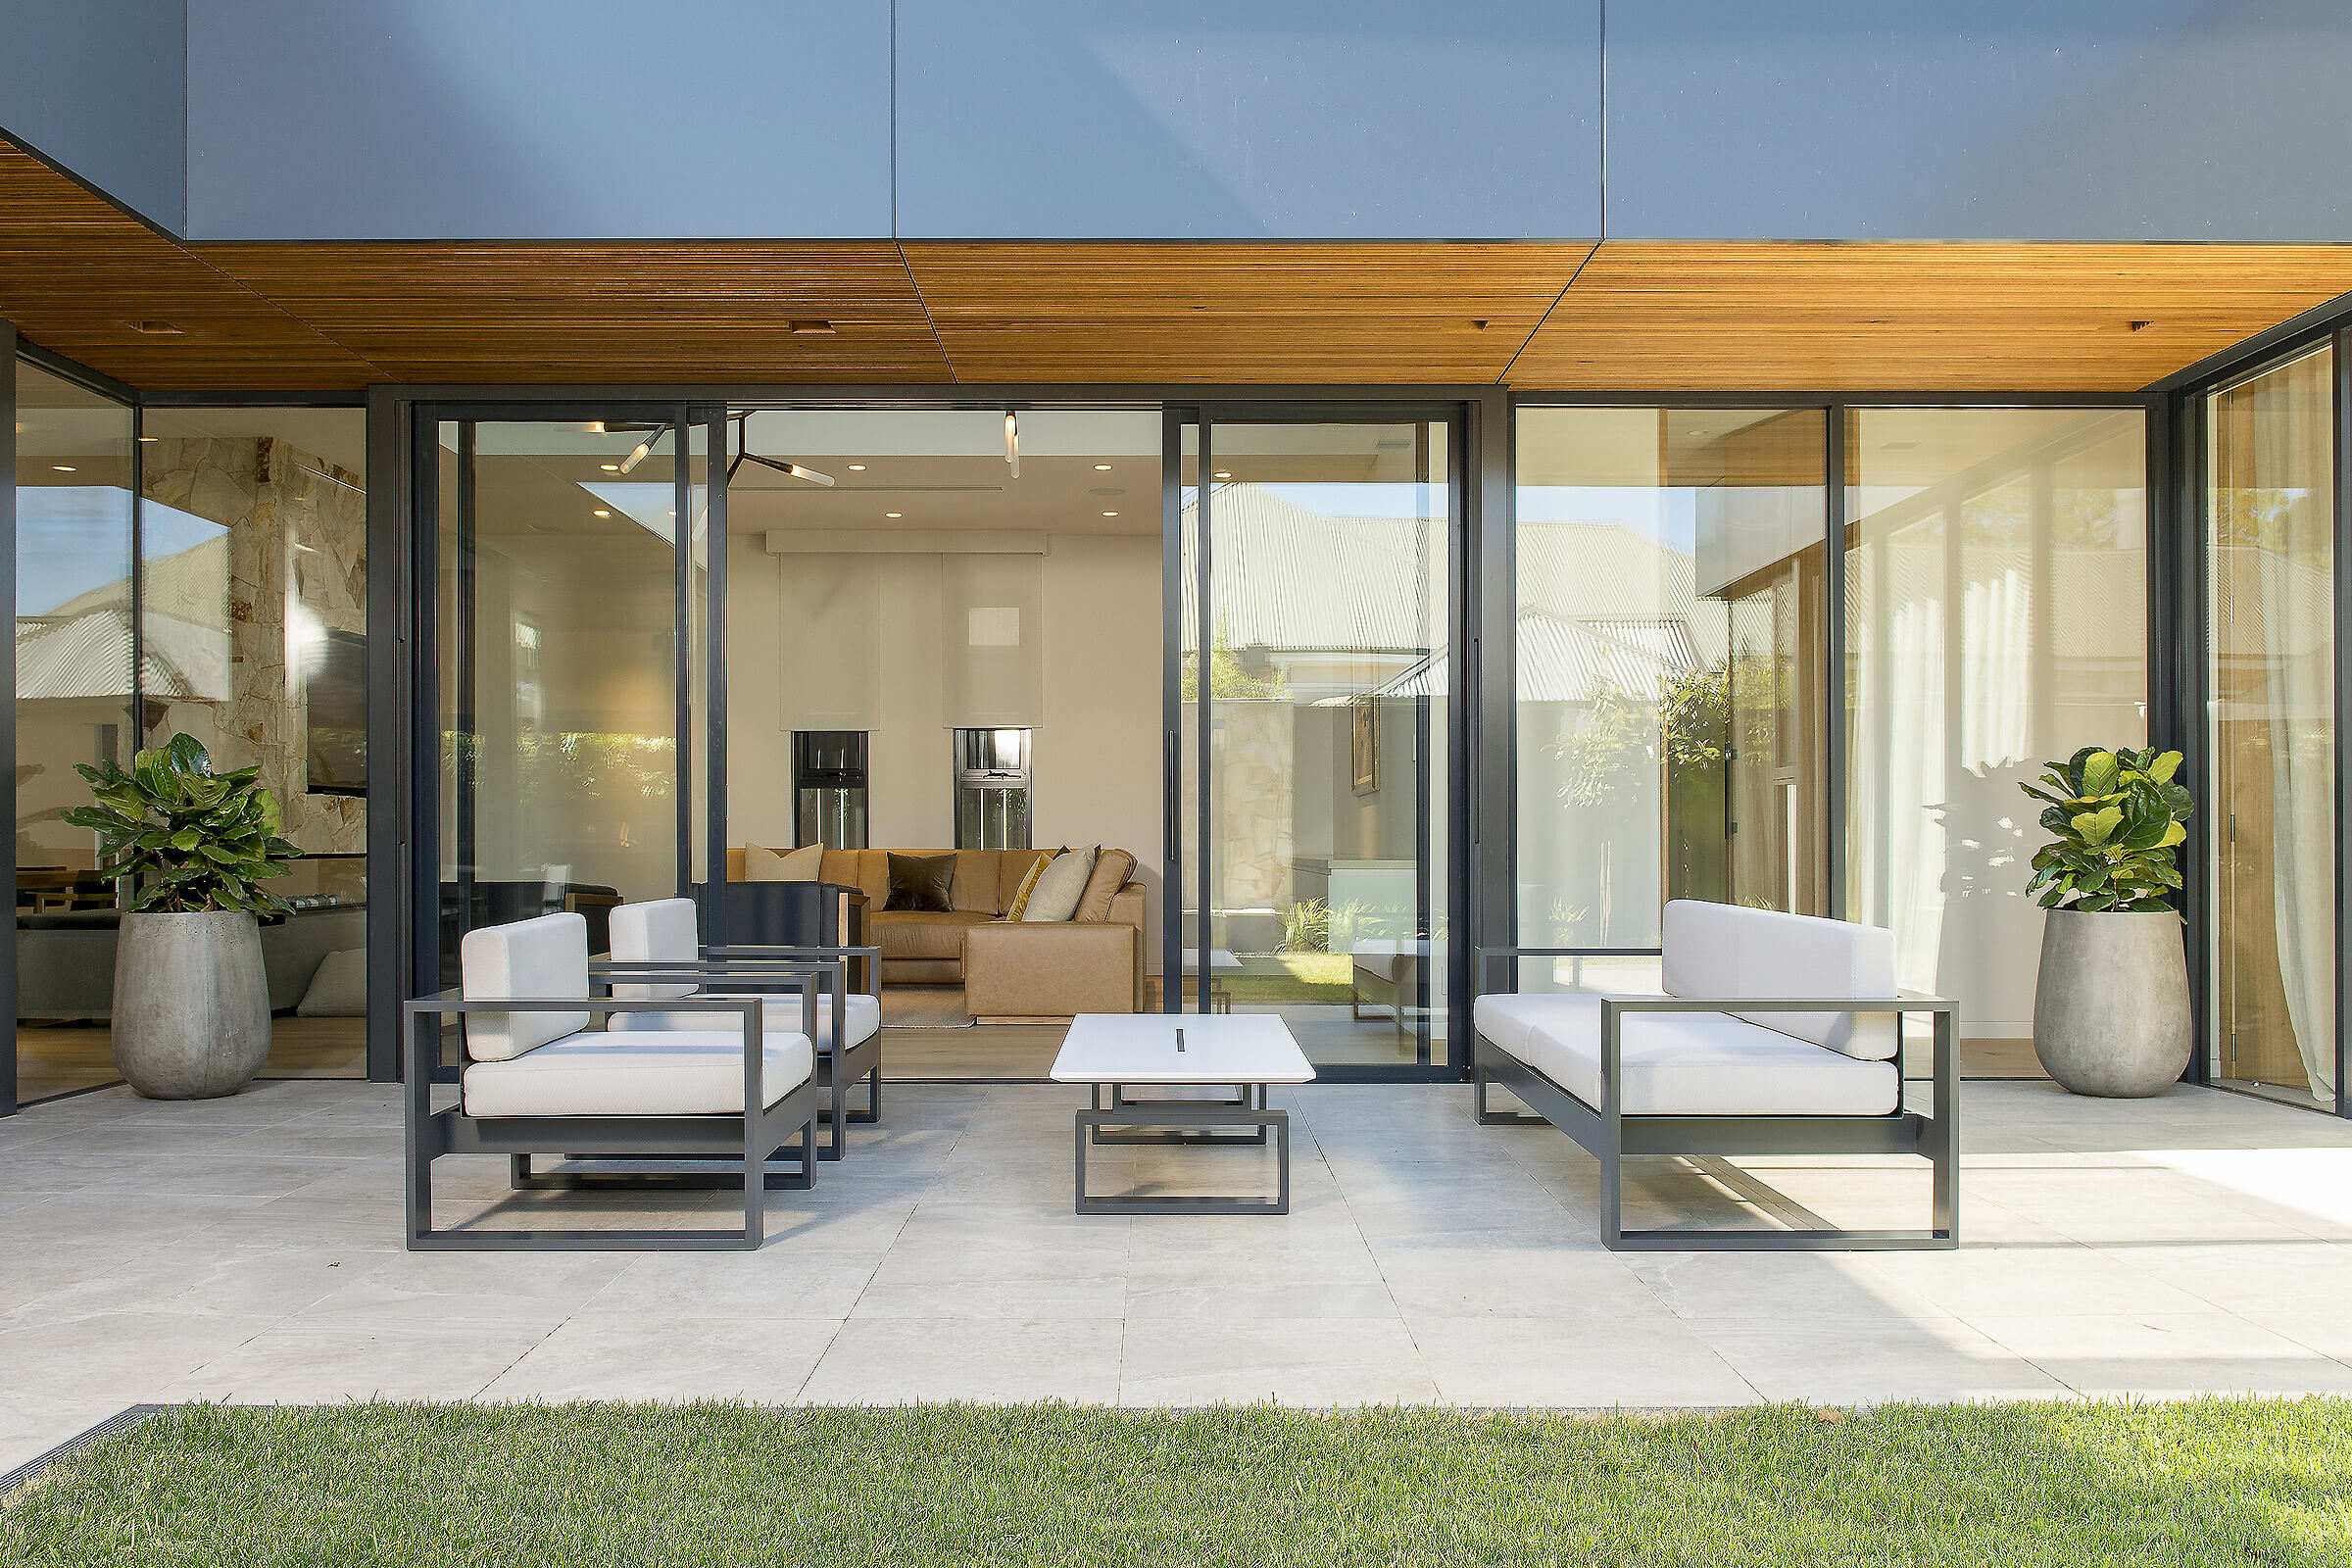 Nestled in the patio of this sensational architectural home is Australian Designer FrancoCrea's outdoor furniture to relax and enjoy balmy summer nights